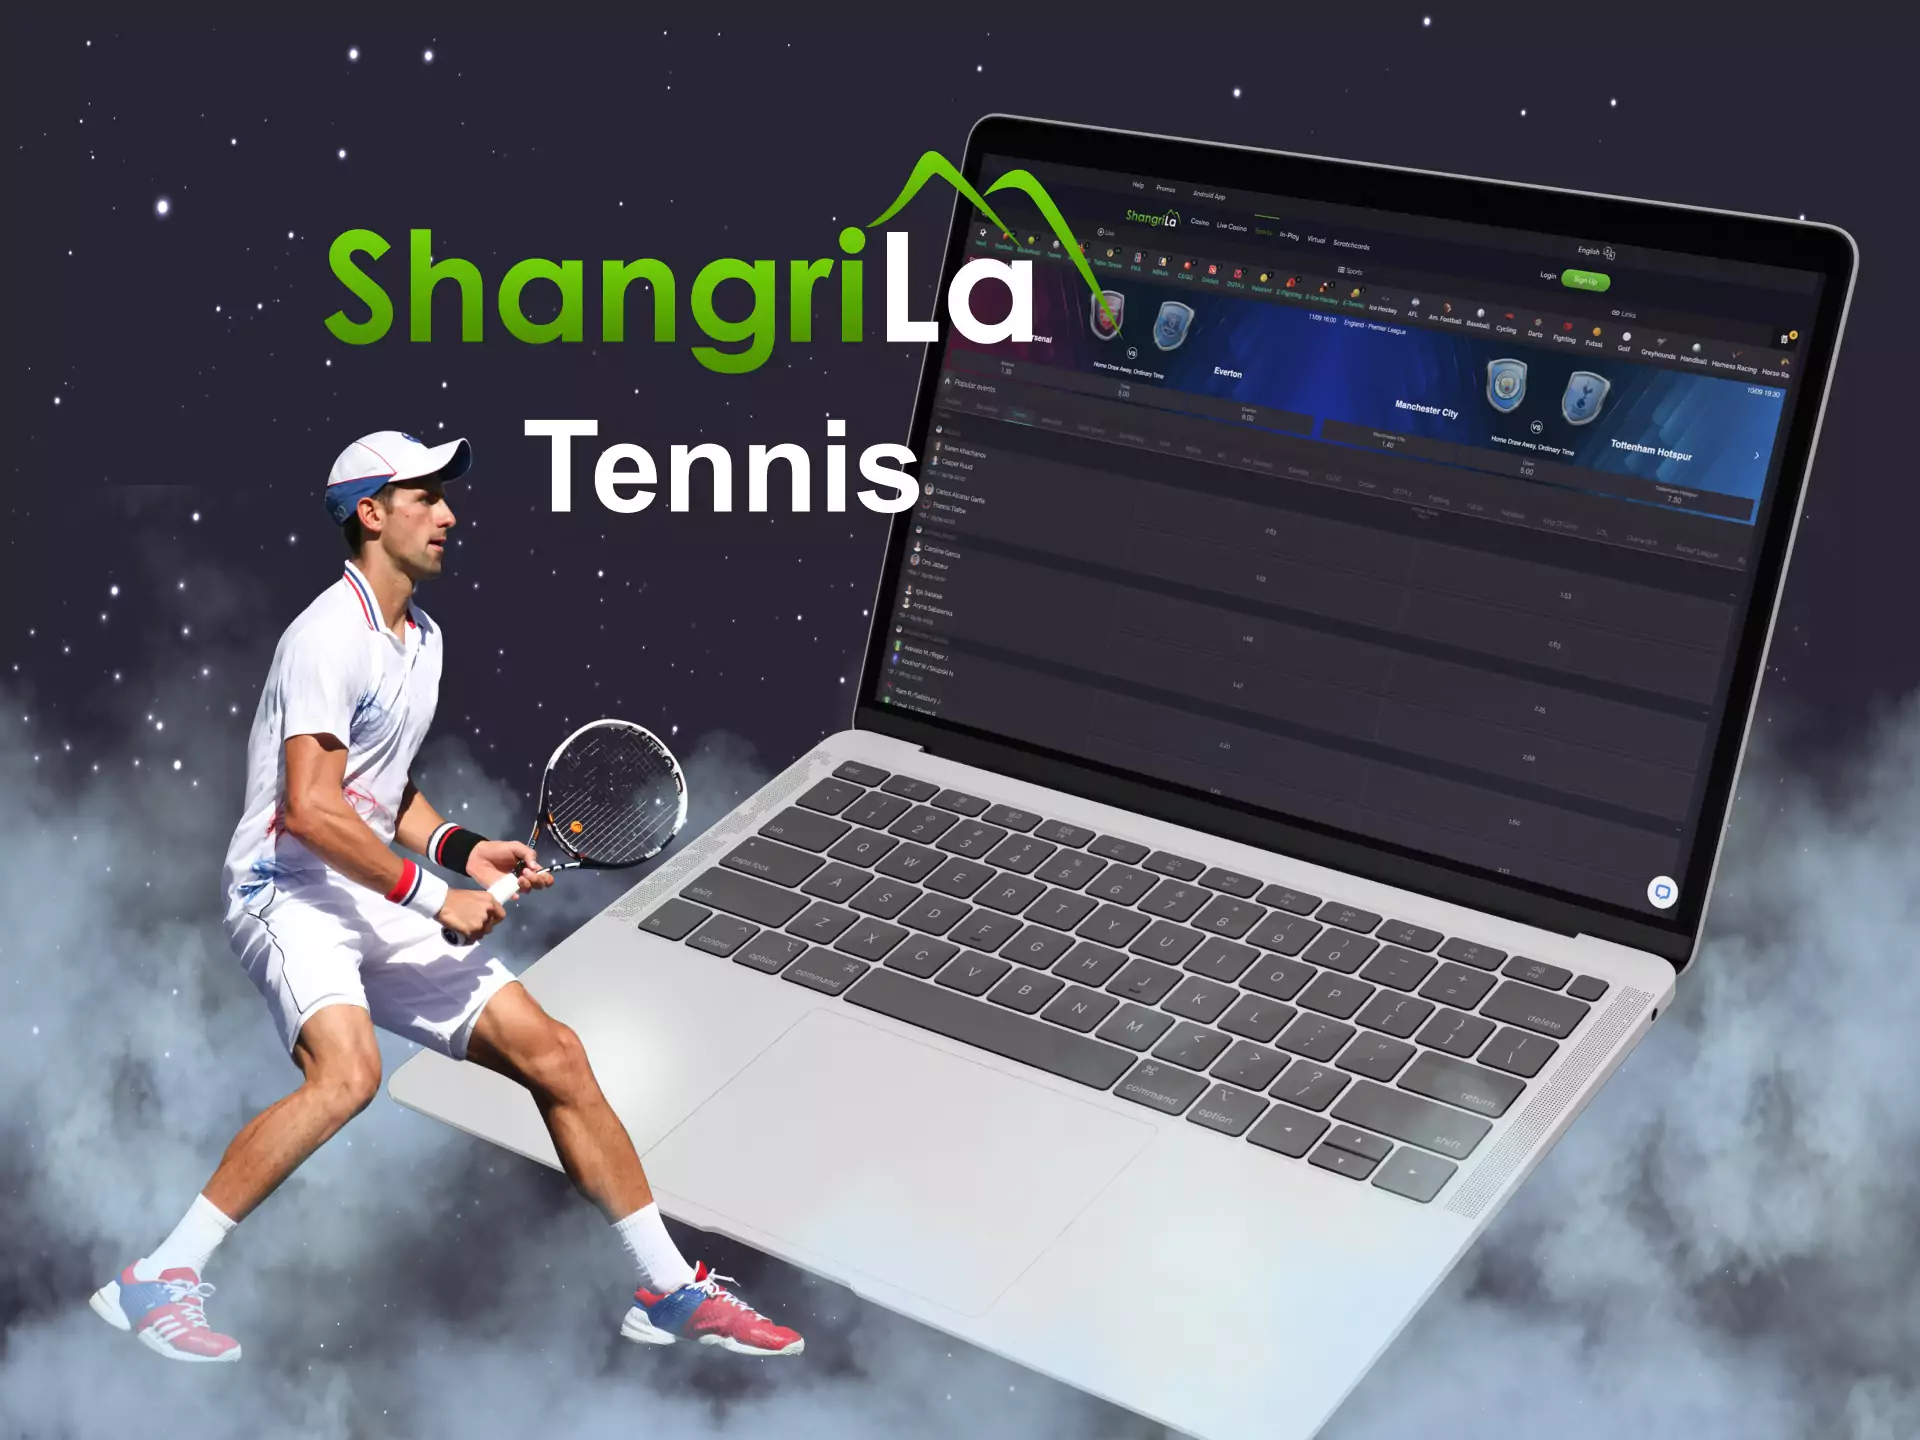 Betting on tennis is a popular activity in the Shangri La sportsbook.